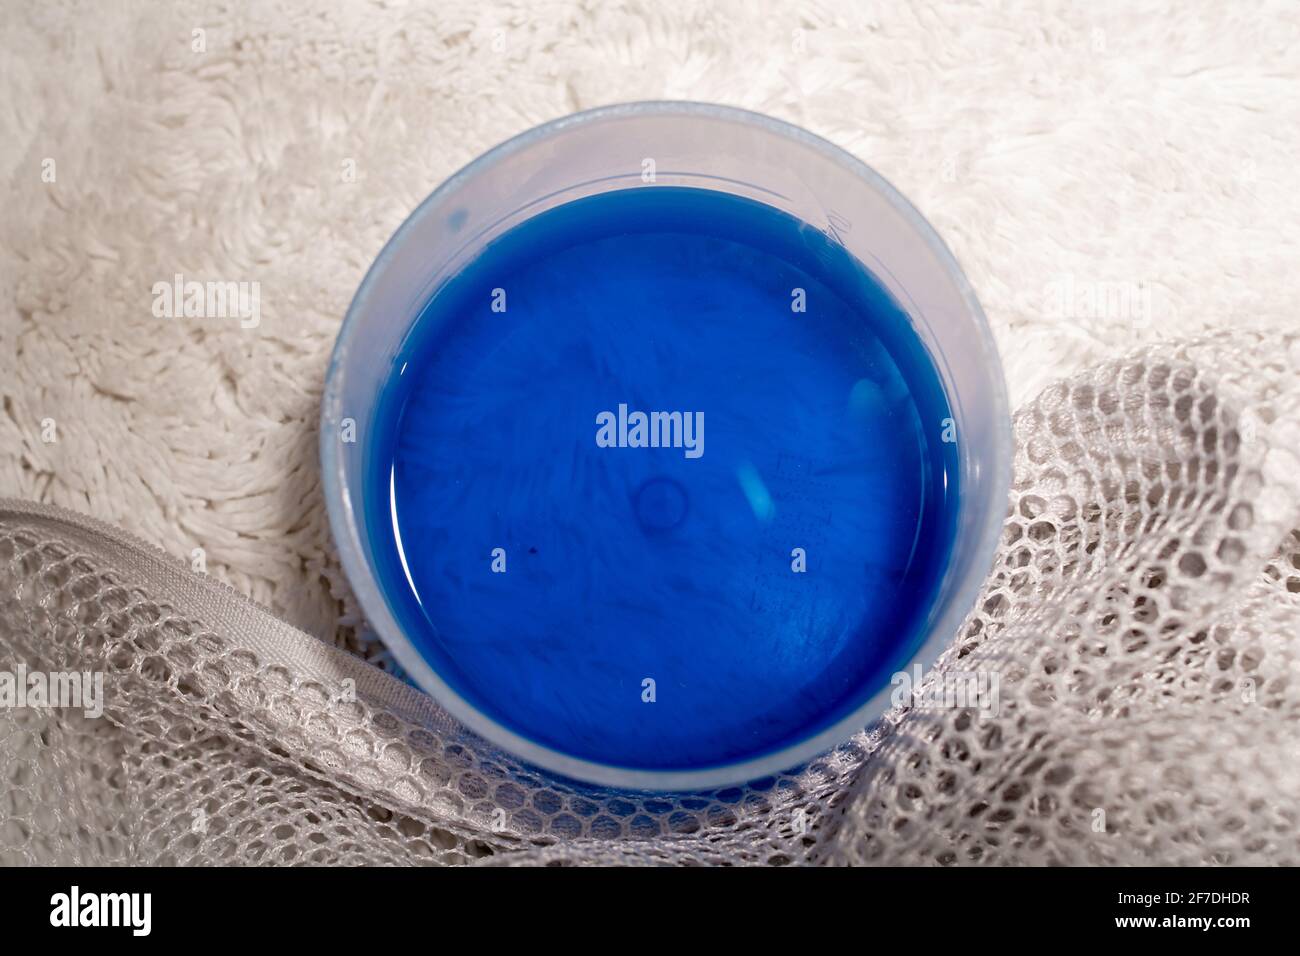 https://c8.alamy.com/comp/2F7DHDR/measuring-cup-of-laundry-detergent-and-a-mesh-laundry-bag-on-plush-white-freshly-washed-carpet-toronto-canada-2F7DHDR.jpg